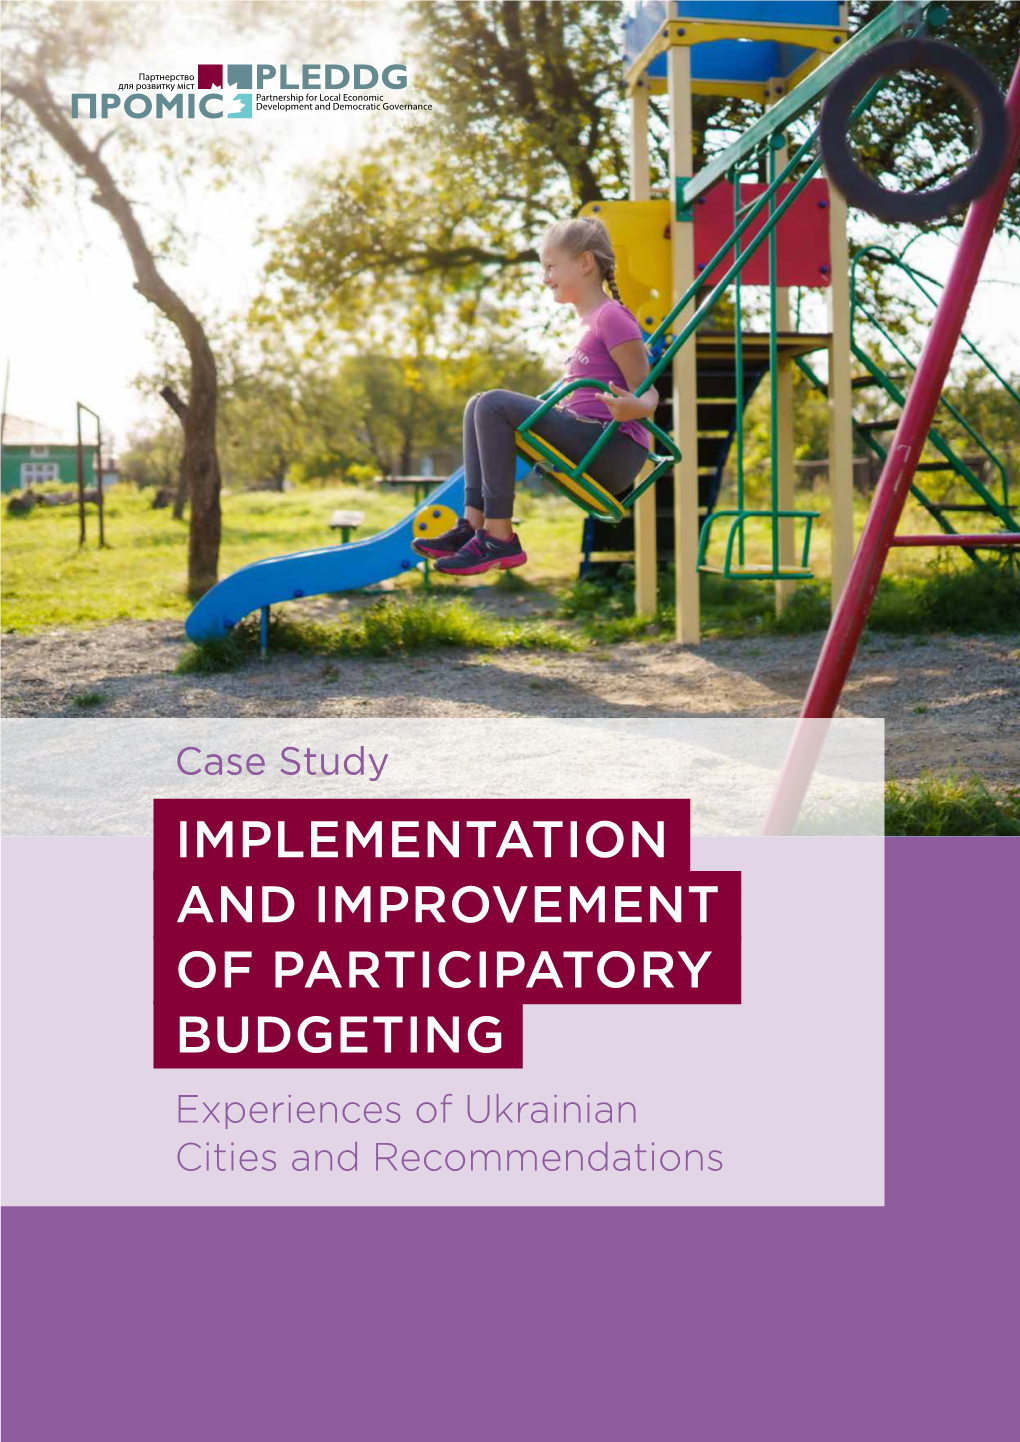 Case Study “Implementation and Improvement of Participatory